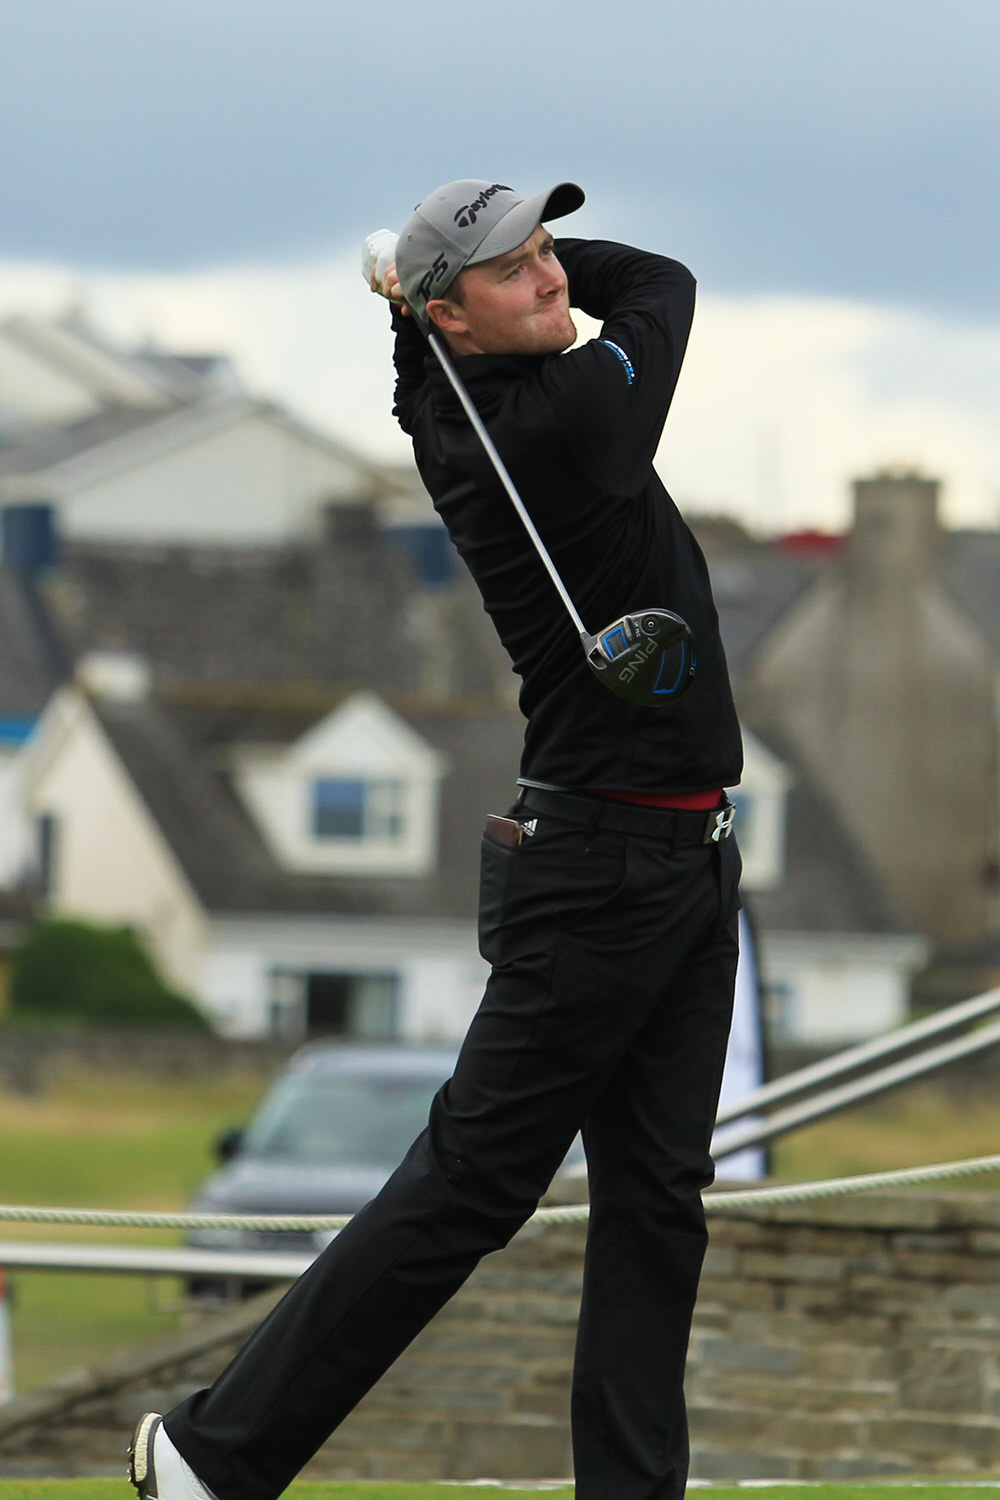  Eugene Smith (Laytown Betystown) teeing of in the third round of the South of Ireland Championship at Lahinch.  Saturday 28th July 2018.
Picture: Nial O'Shea 